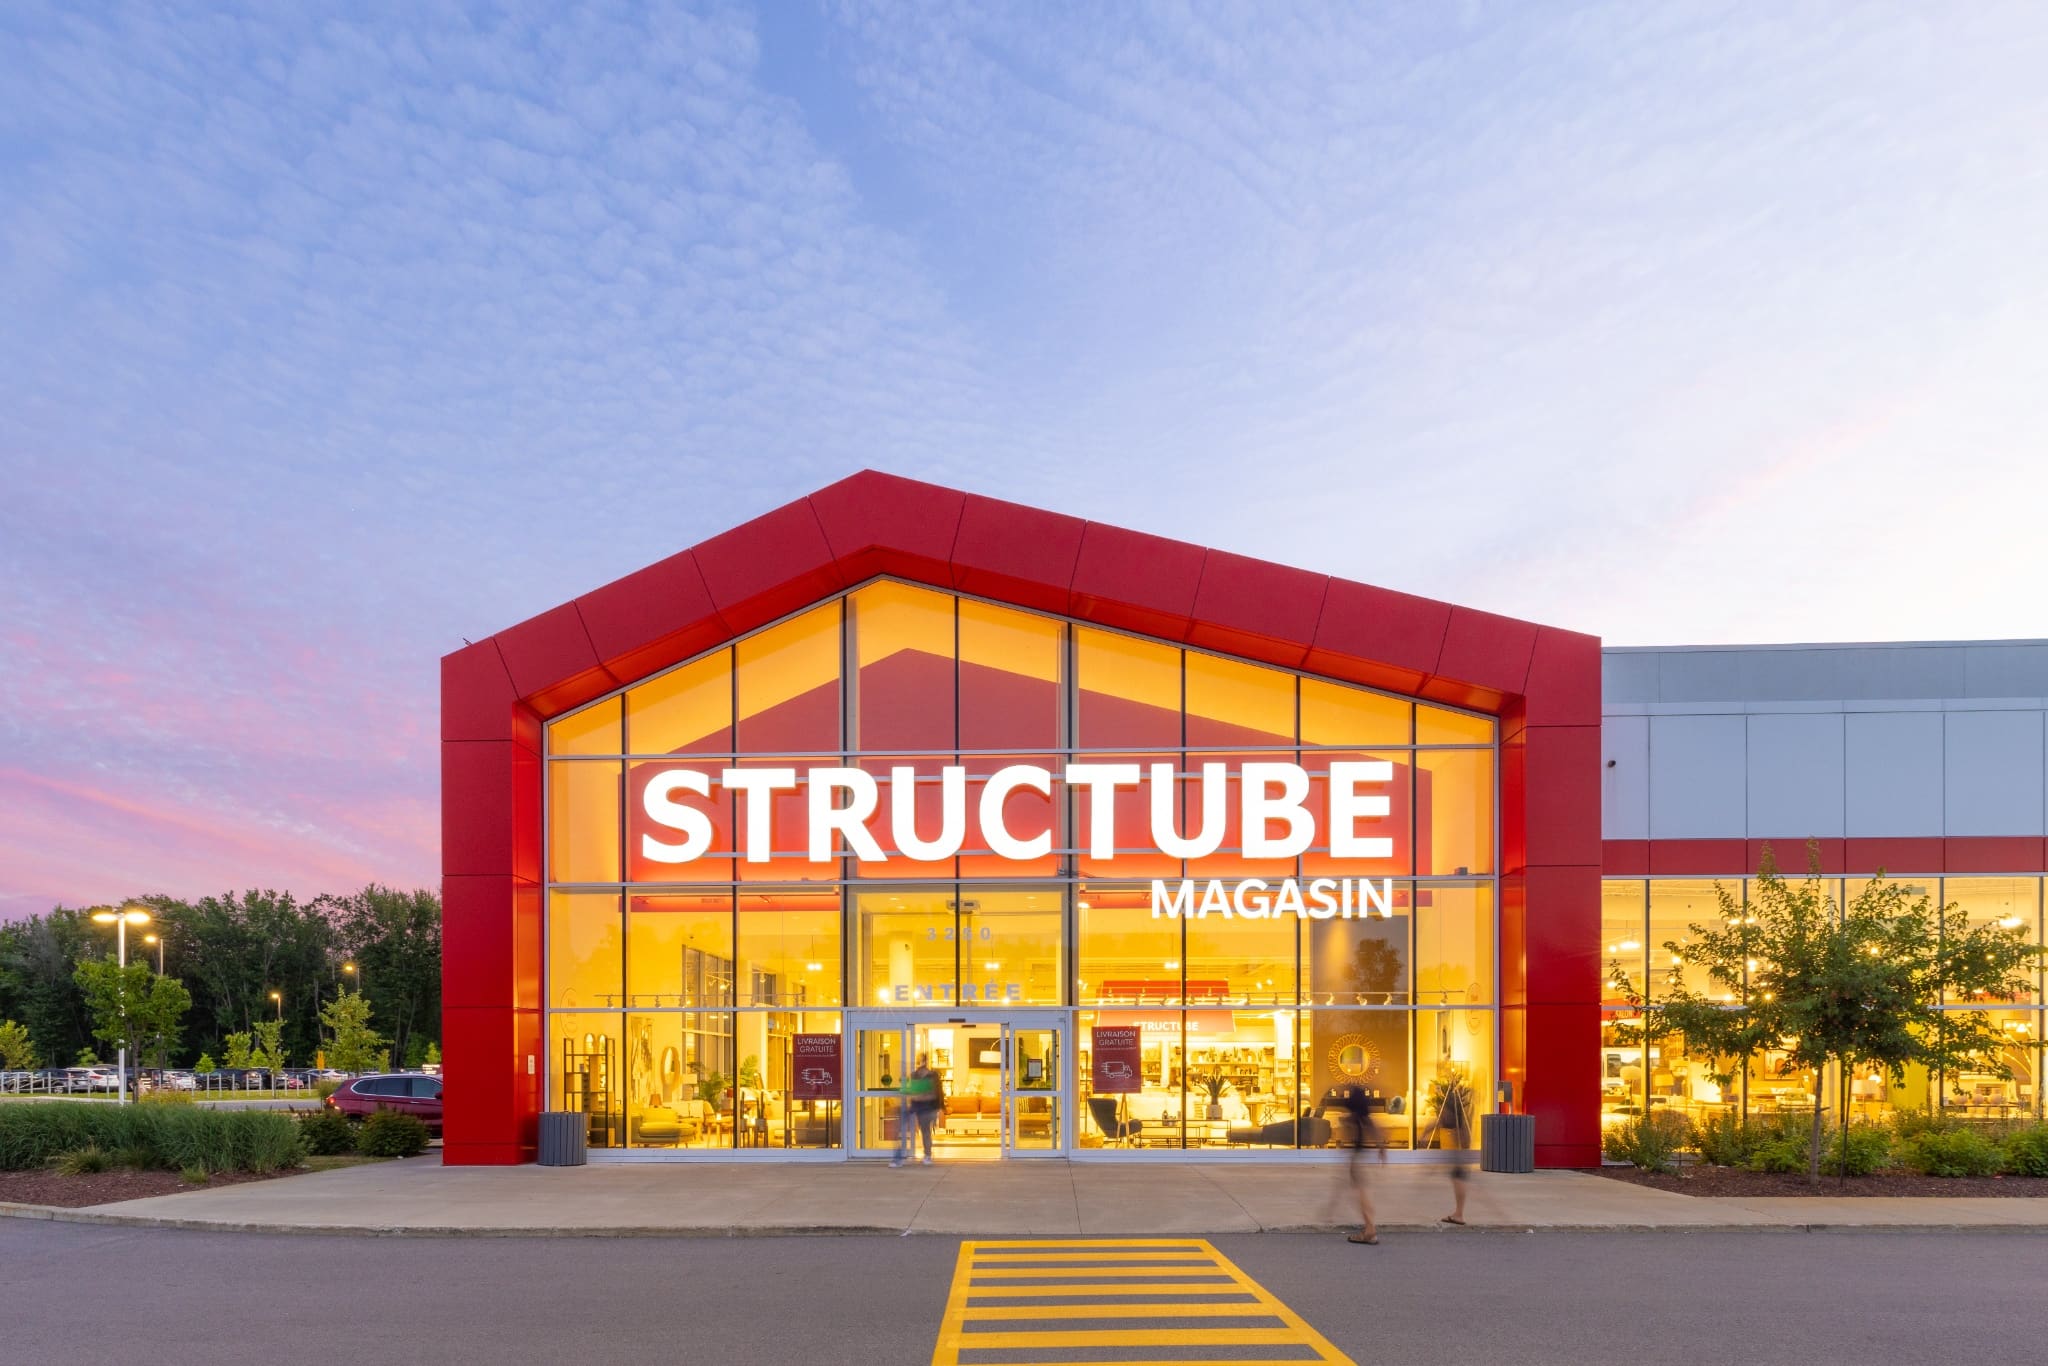 Featured image for “Structube”